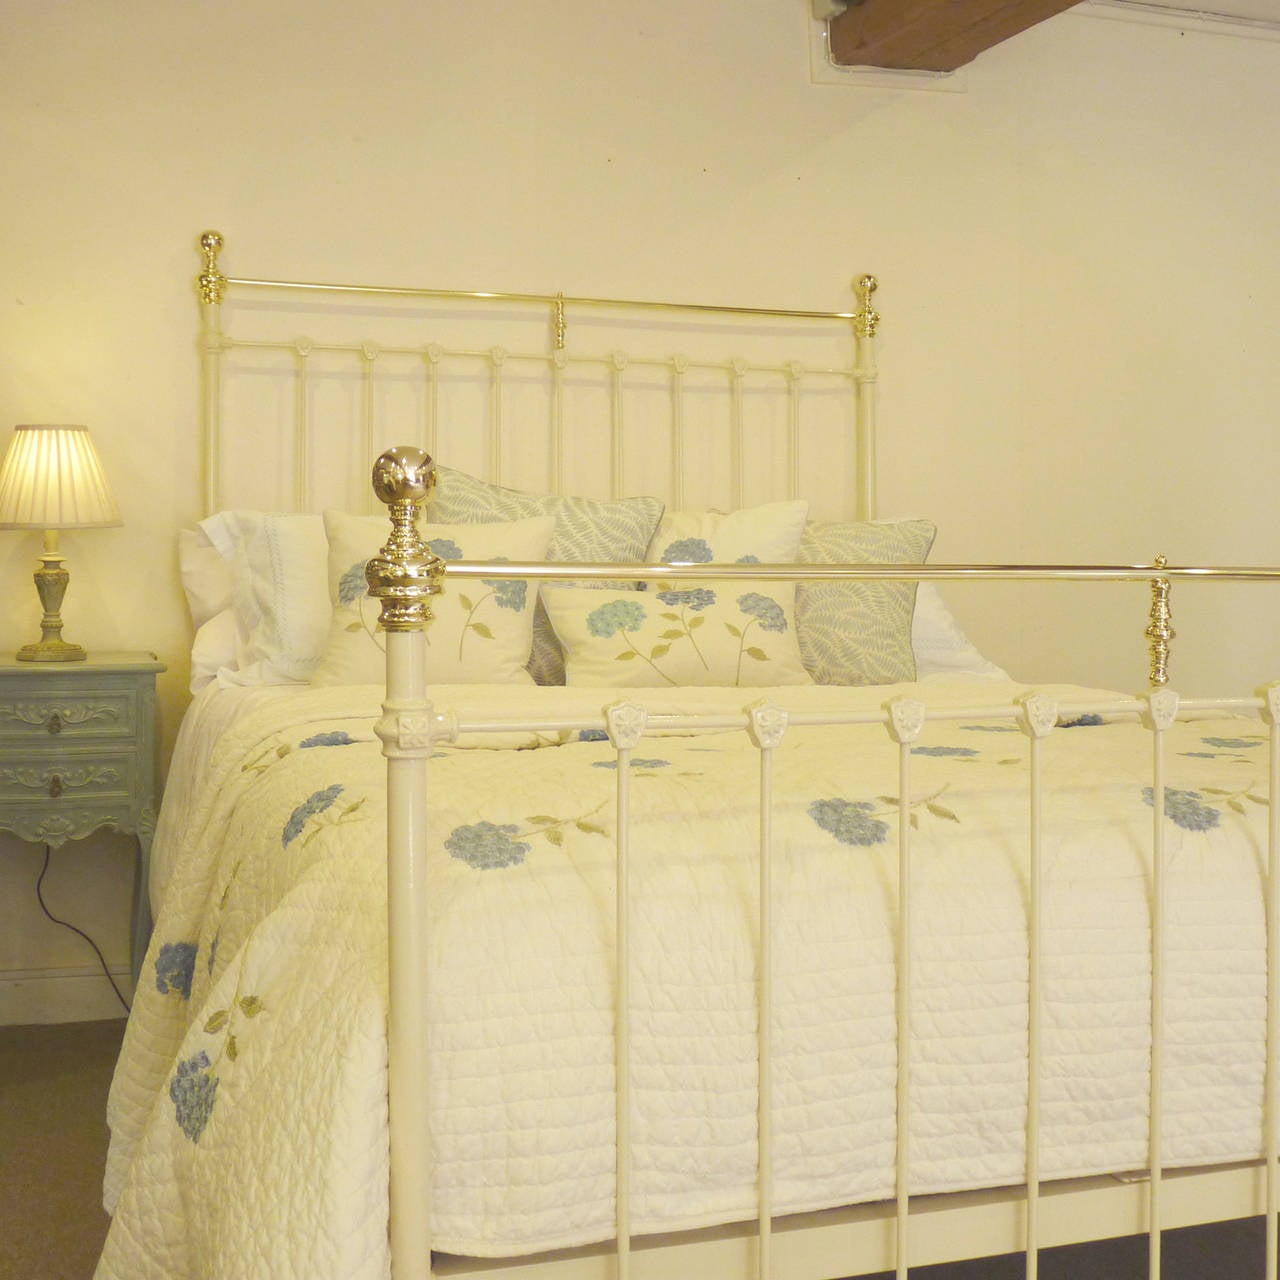 This fine example of an antique bedstead with decorative moulding that has been restored from an original frame.
The bed accepts a British king-size or American queen size base and mattress (60 in wide).
The price is for the bedstead frame alone,